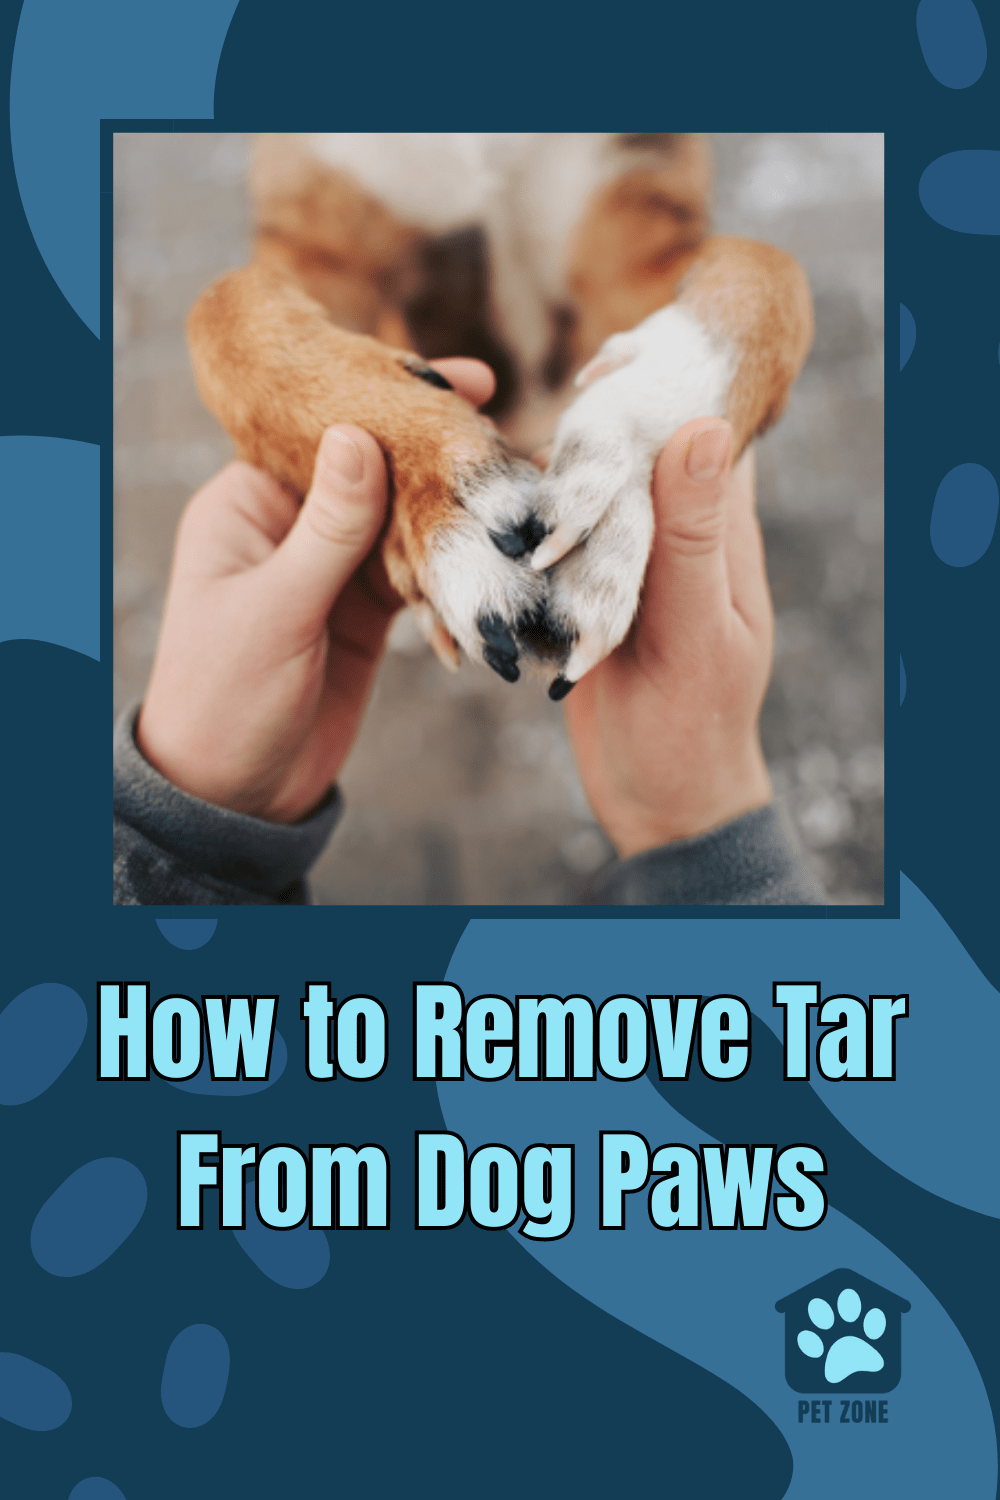 How to Remove Tar From Dog Paws